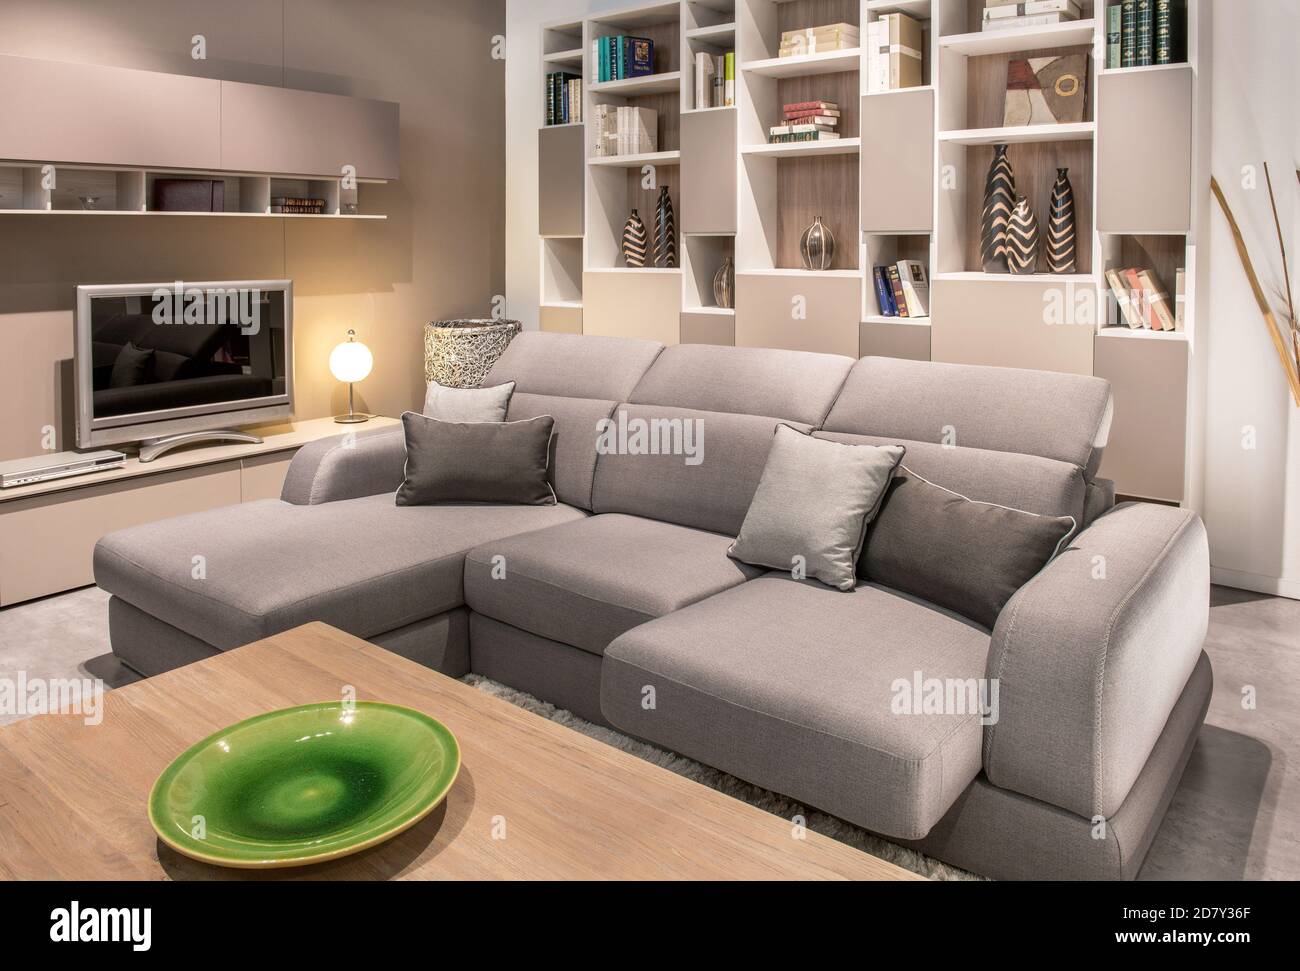 Large comfortable beige sofa in a cozy living room interior with television and wall display unit viewed over a coffe table with green earthenware pla Stock Photo